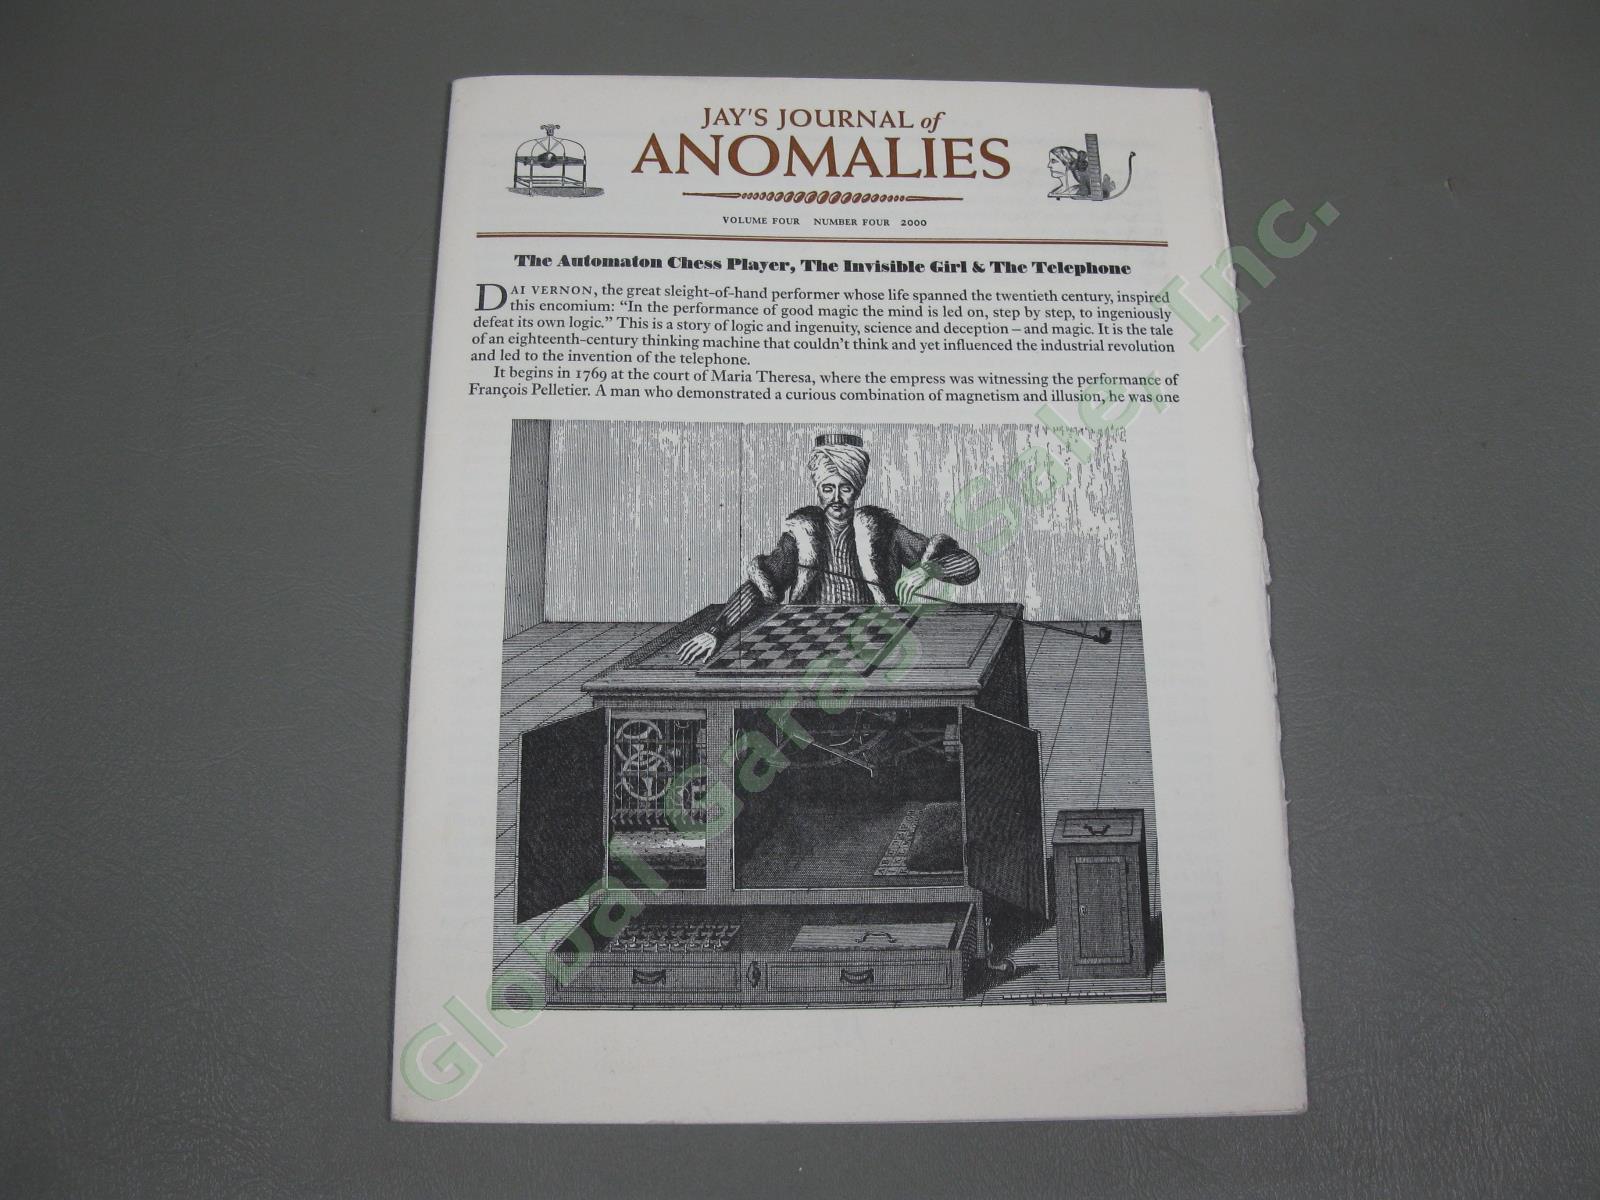 Ricky Jays Journal of Anomalies Last Orig Complete Vol 4 Quarterly Periodical NR 11